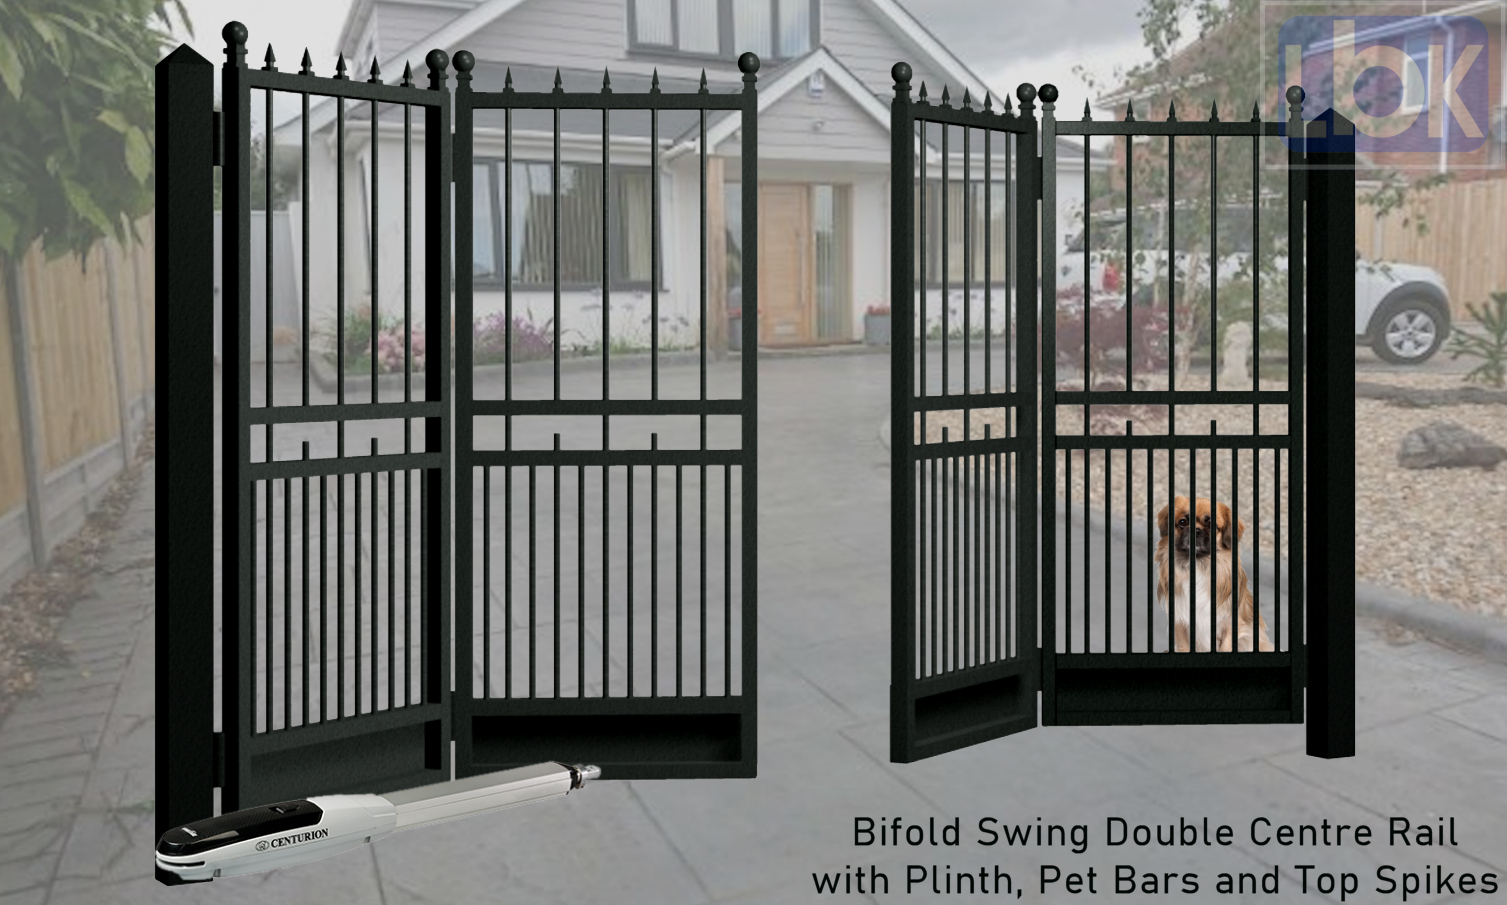 03b Bifold Swing Double Centre Rail with Plinth, Pet Bars and Top Spikes